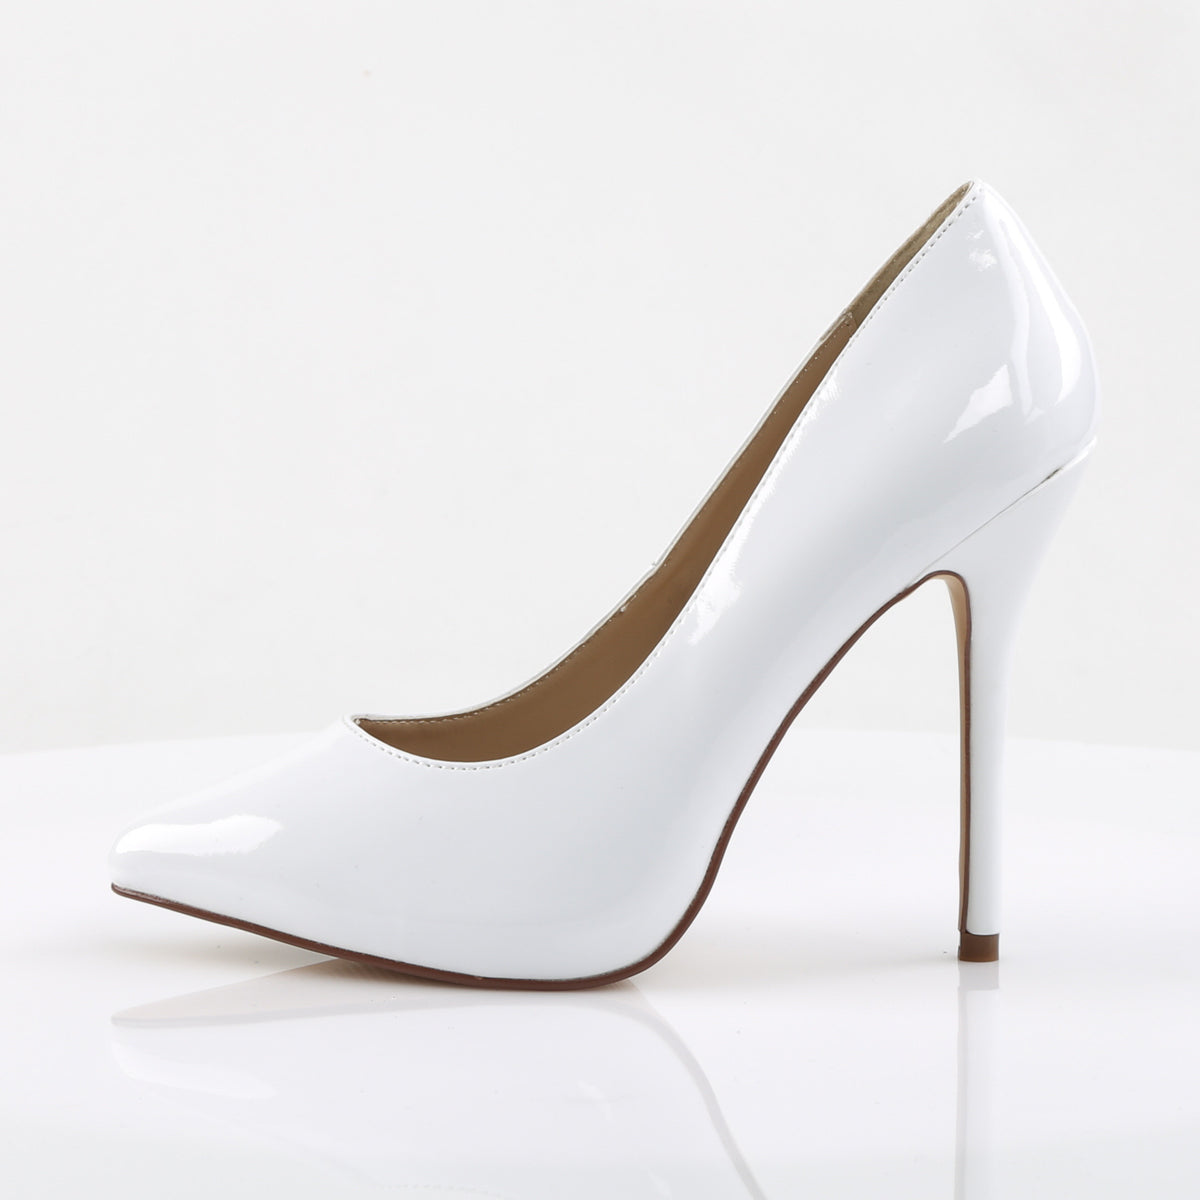 AMUSE-20 Pleaser Sexy 5" Heel White Patent Fetish Footwear-Pleaser- Sexy Shoes Pole Dance Heels